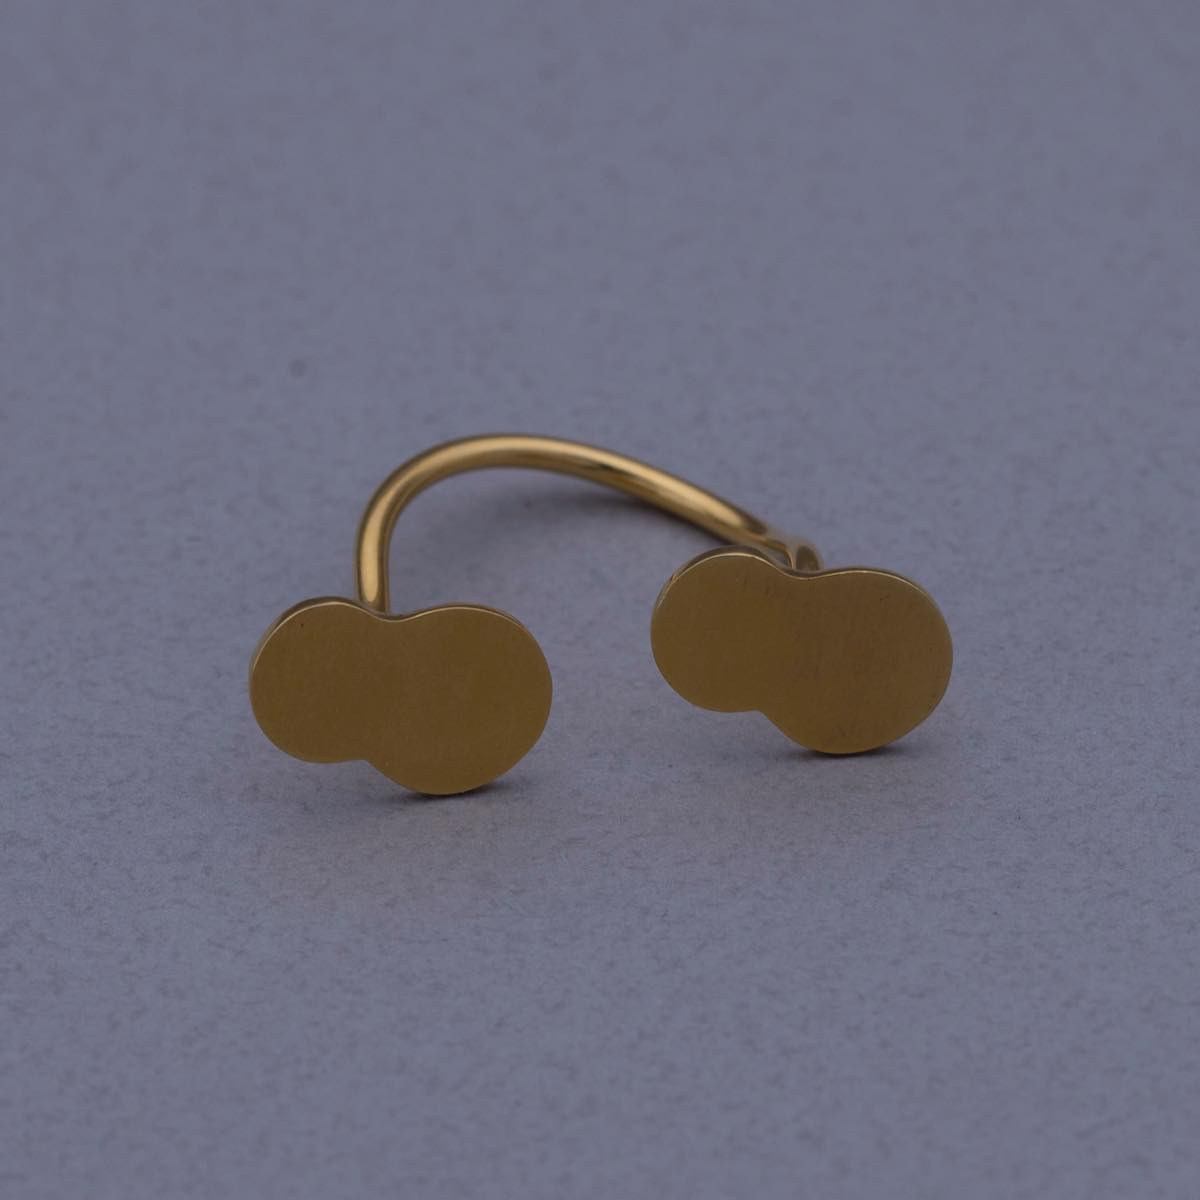 Whimsy ring nuts gold